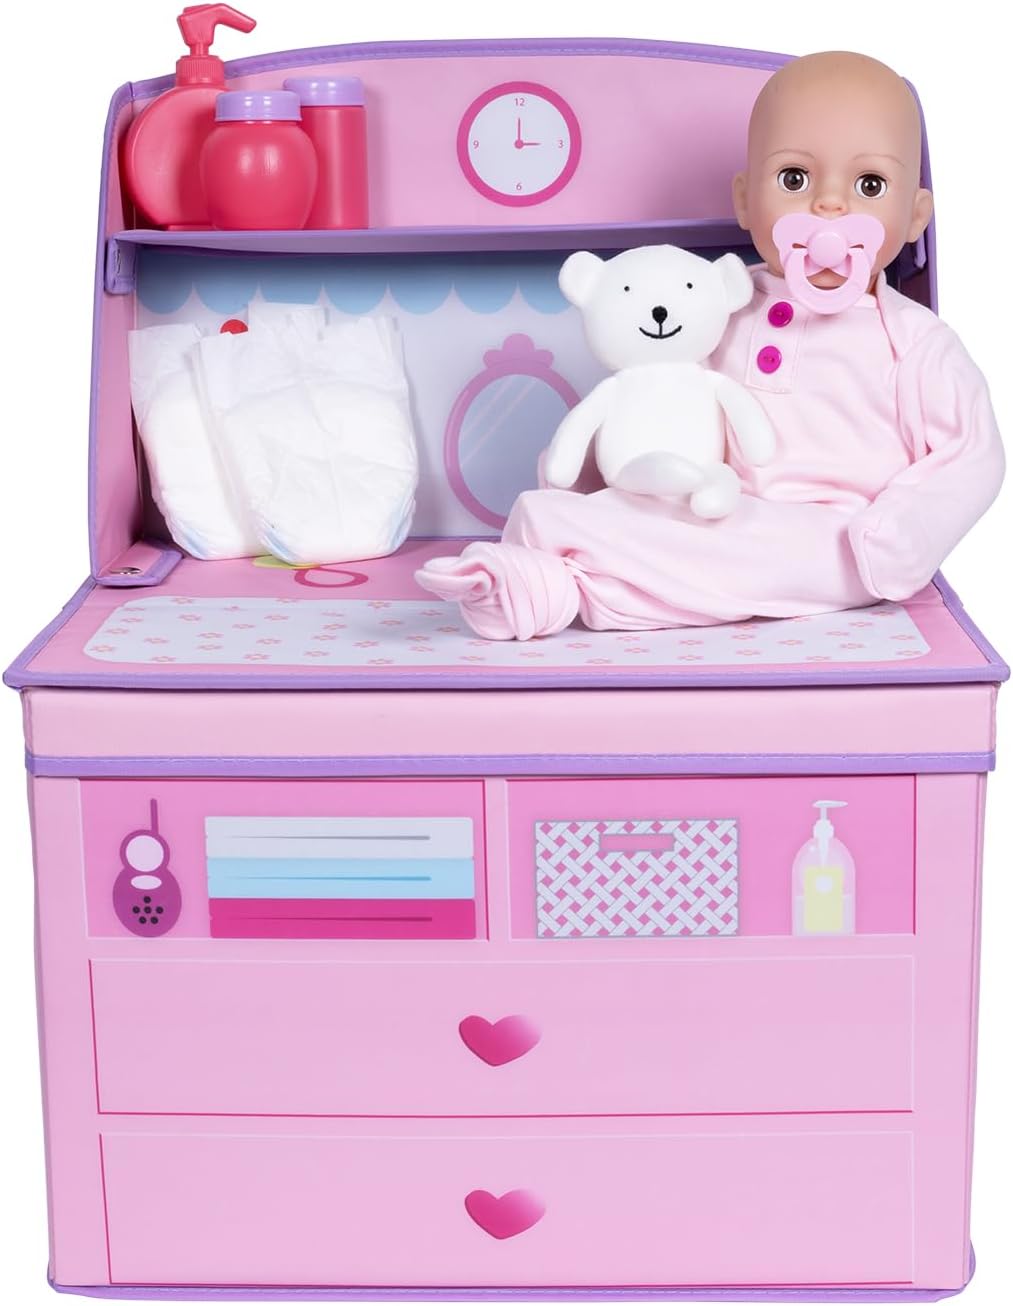 Perfectly Pink 10 Piece Baby Doll Changing Table Gift Set by Adora #24036